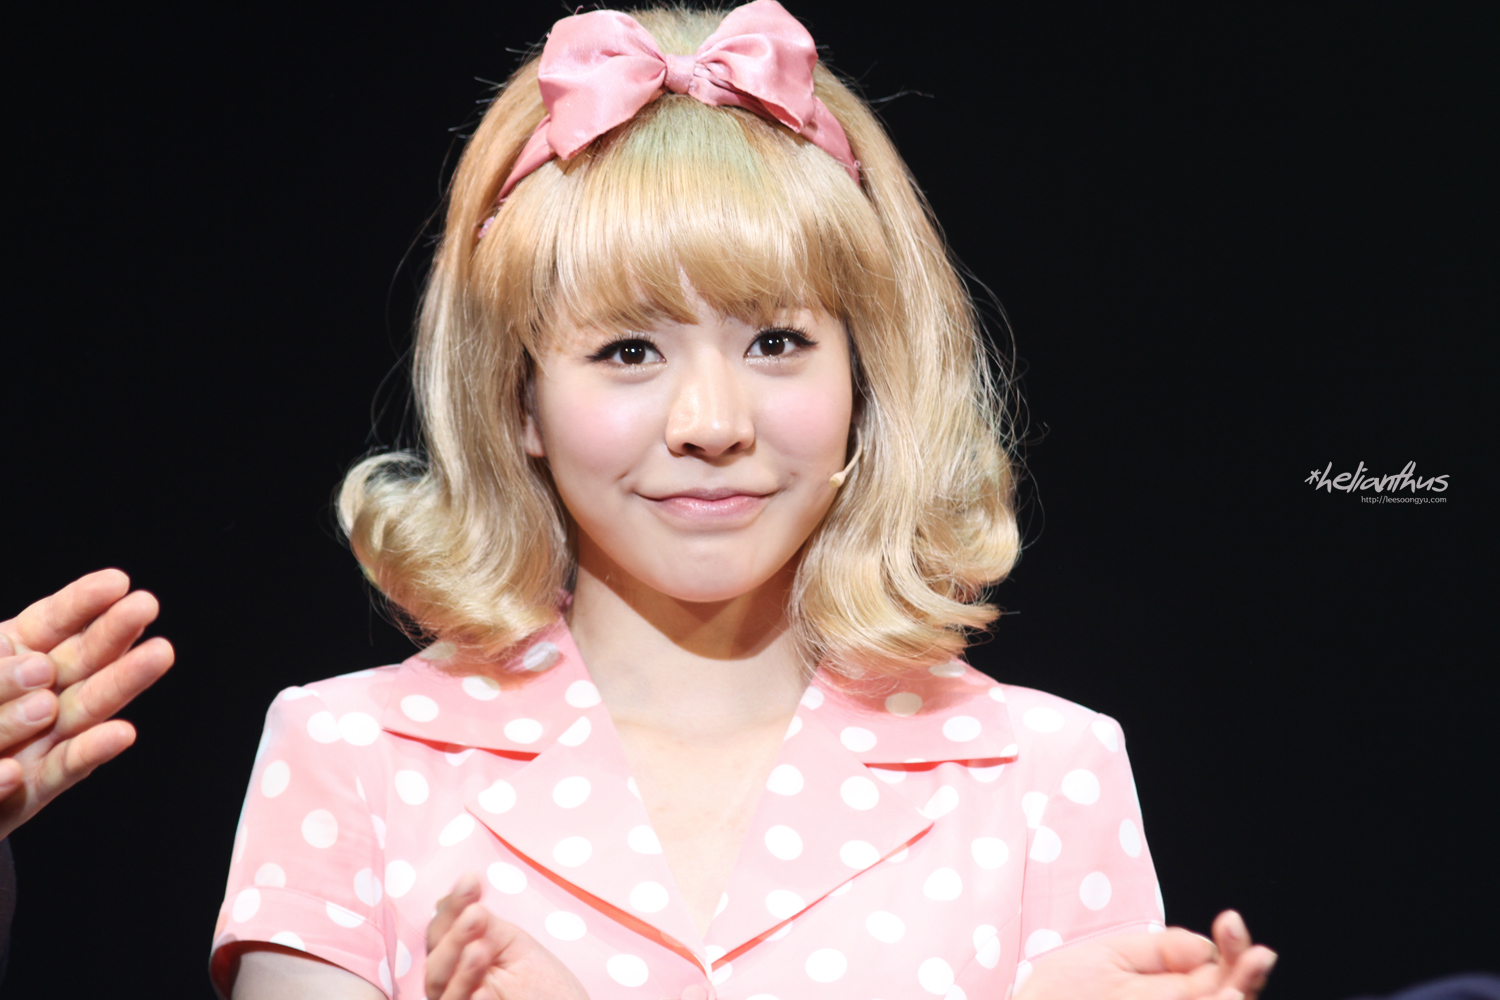 The Short Member Full of Big Surprises: A Portrait of Sunny for Her ...